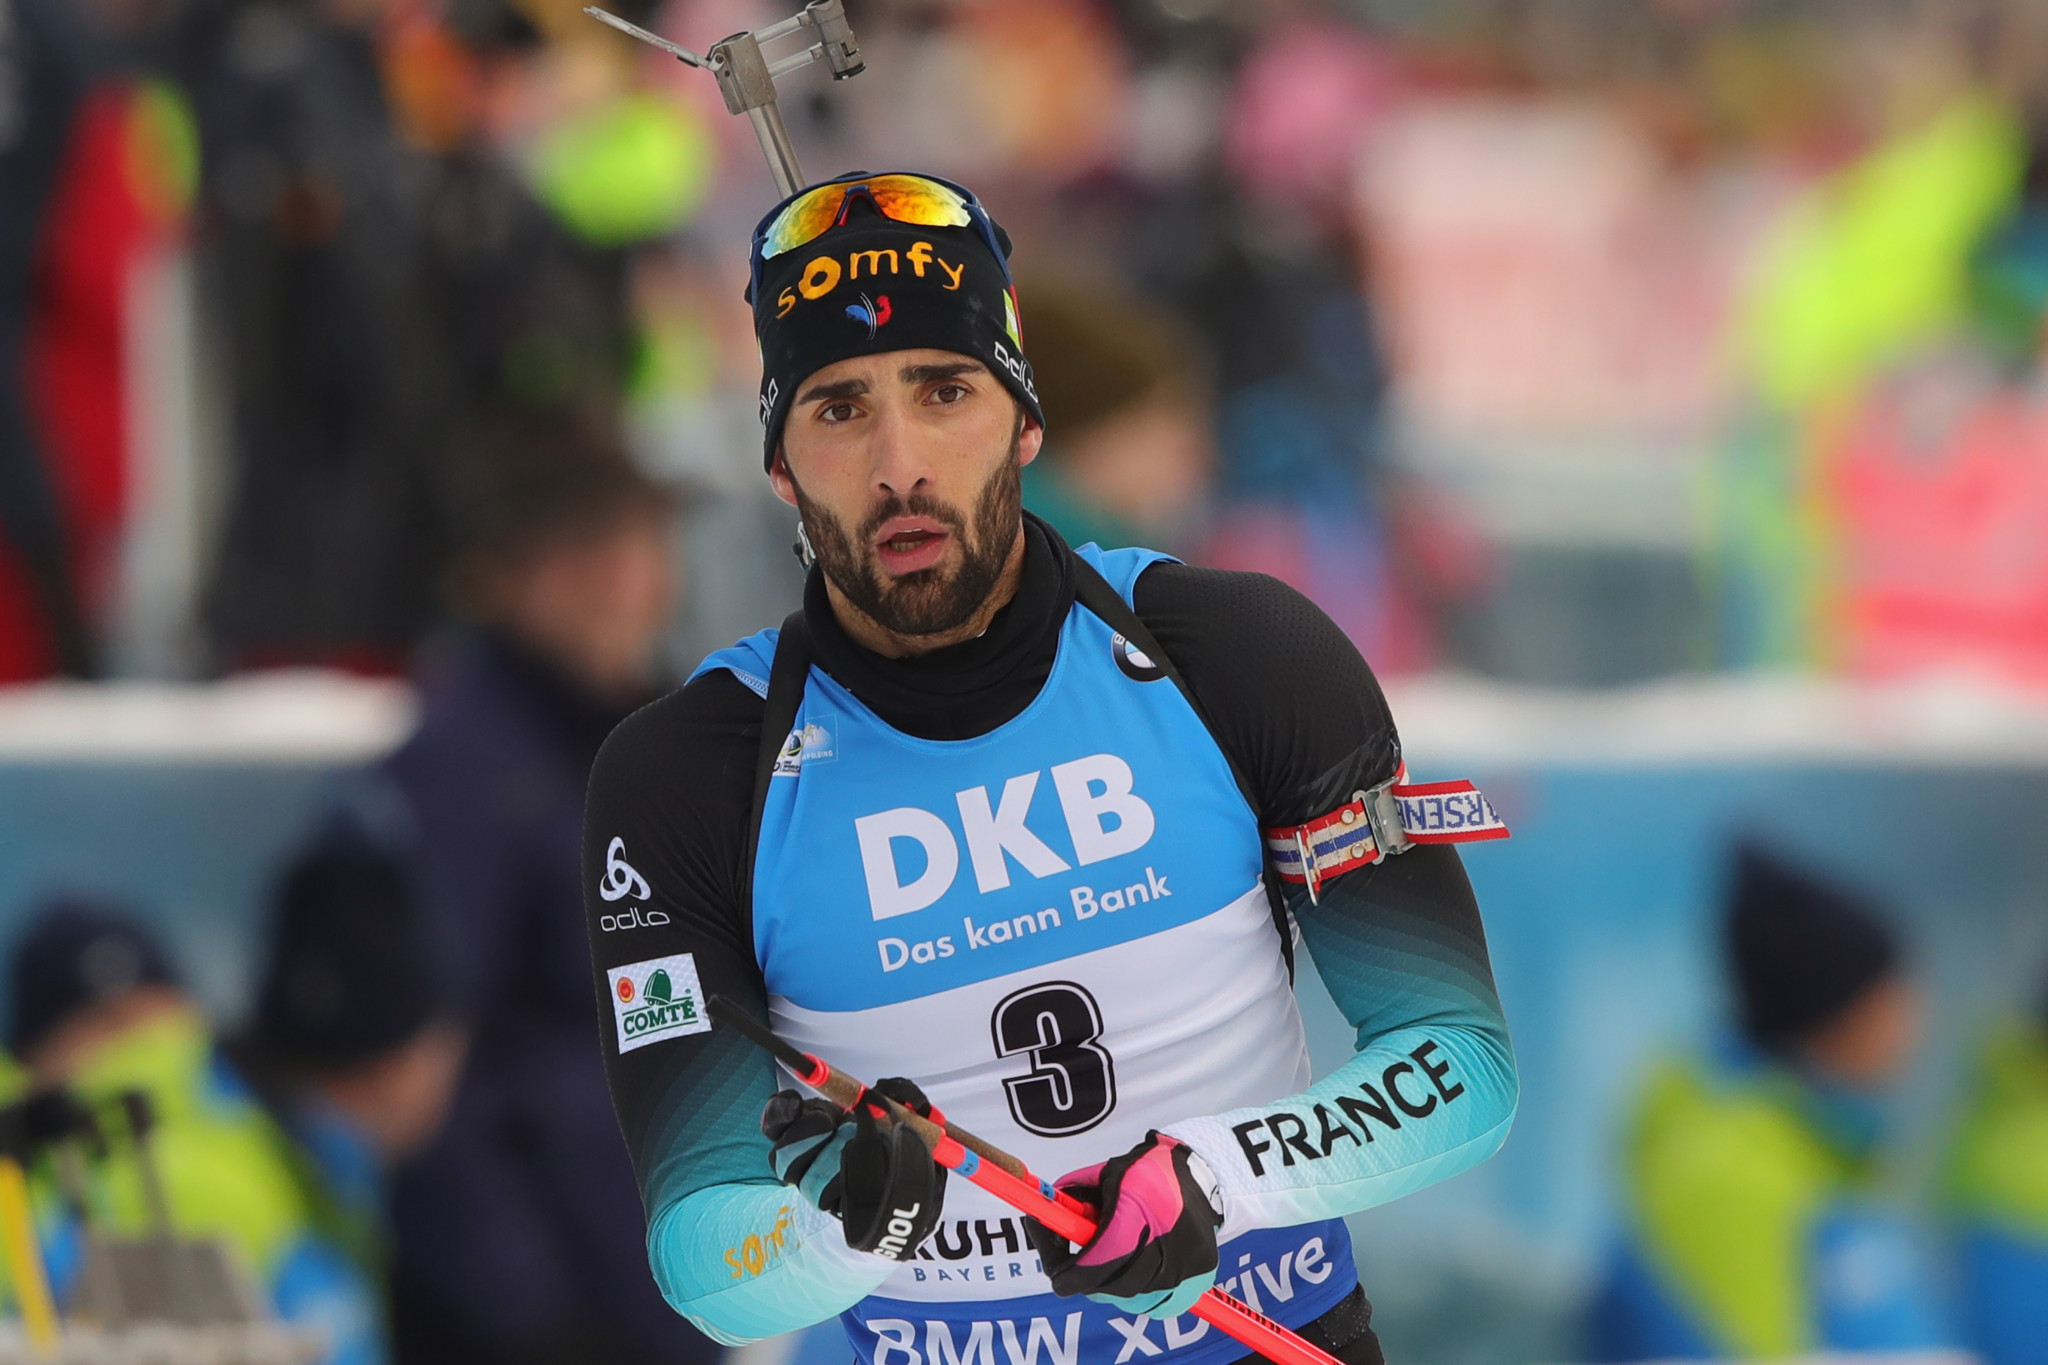 Martin Fourcade missed out on the podium but remains third in the overall World Cup standings ©Getty Images